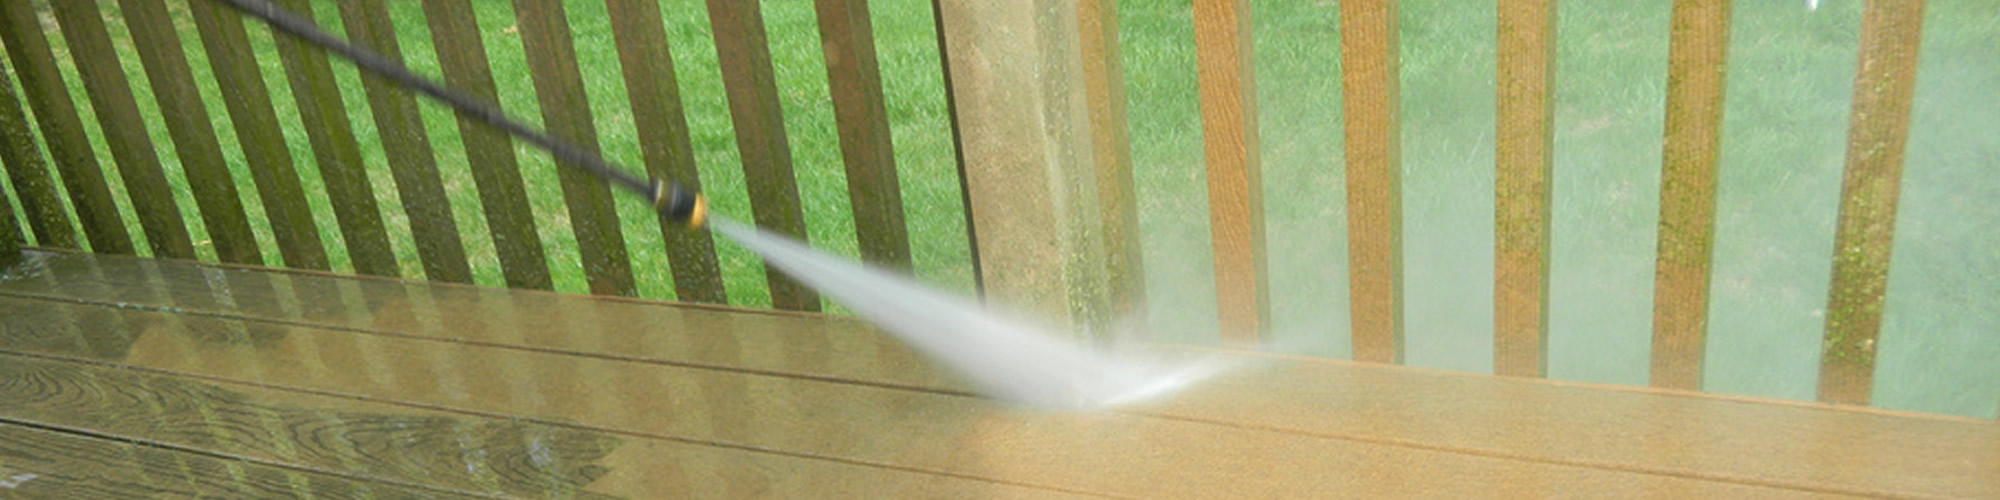 Power Washing Services Wisconsin